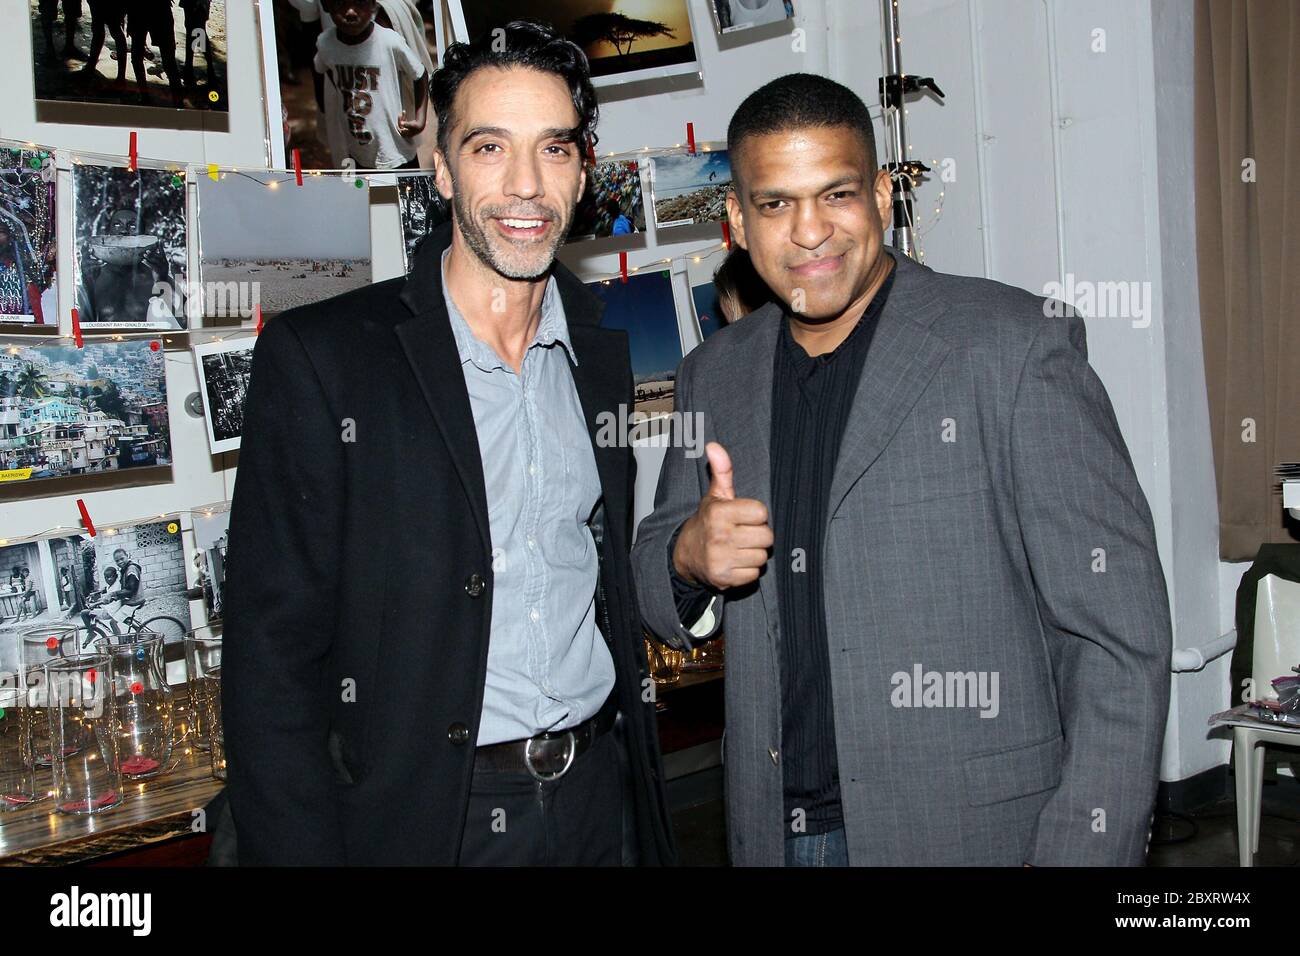 New York, NY, USA. 2 February, 2017. Carlos Leon, Maurepaz Auguste at the RE-Touch Haiti Charity To benefit The Artists Institute/Artists for Peace & Justice at Splashlight Studios. Credit: Steve Mack/Alamy Stock Photo